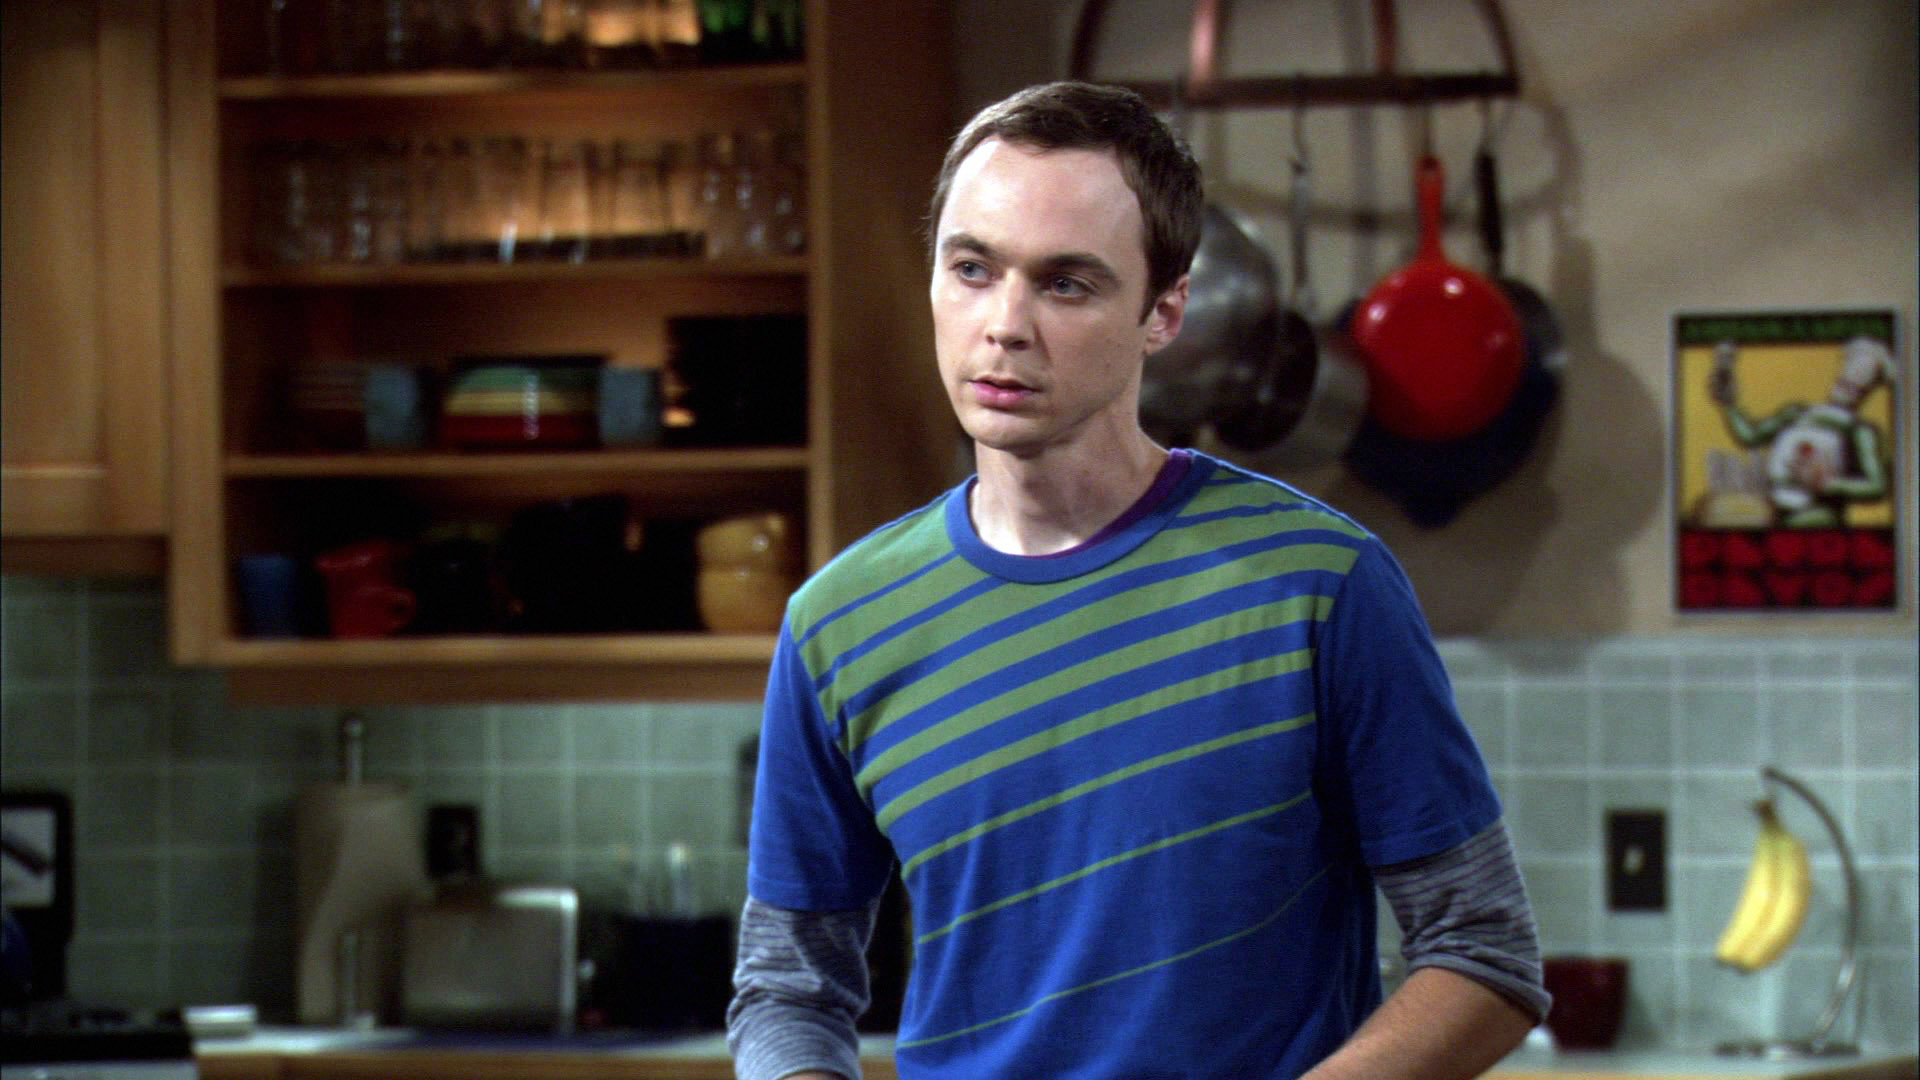 Even Creator Admitted This Sheldon Scene Changed TBBT Forever